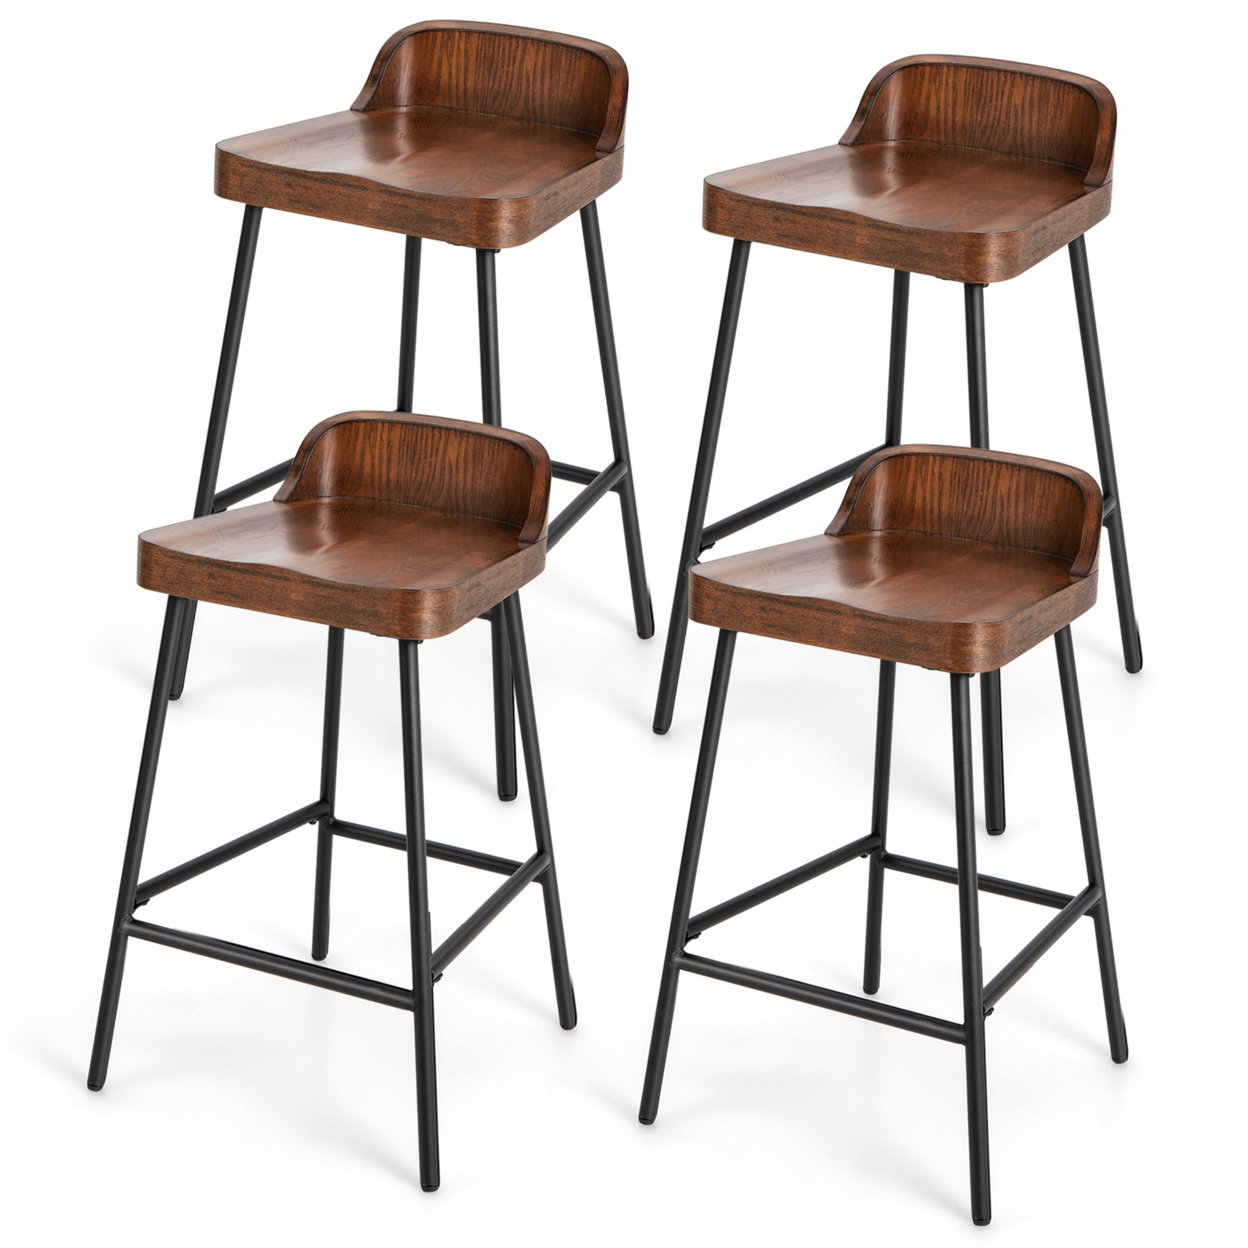 4PCS 24.5'' Low-Back Bar Stool Industrial Counter Height Chair Stool